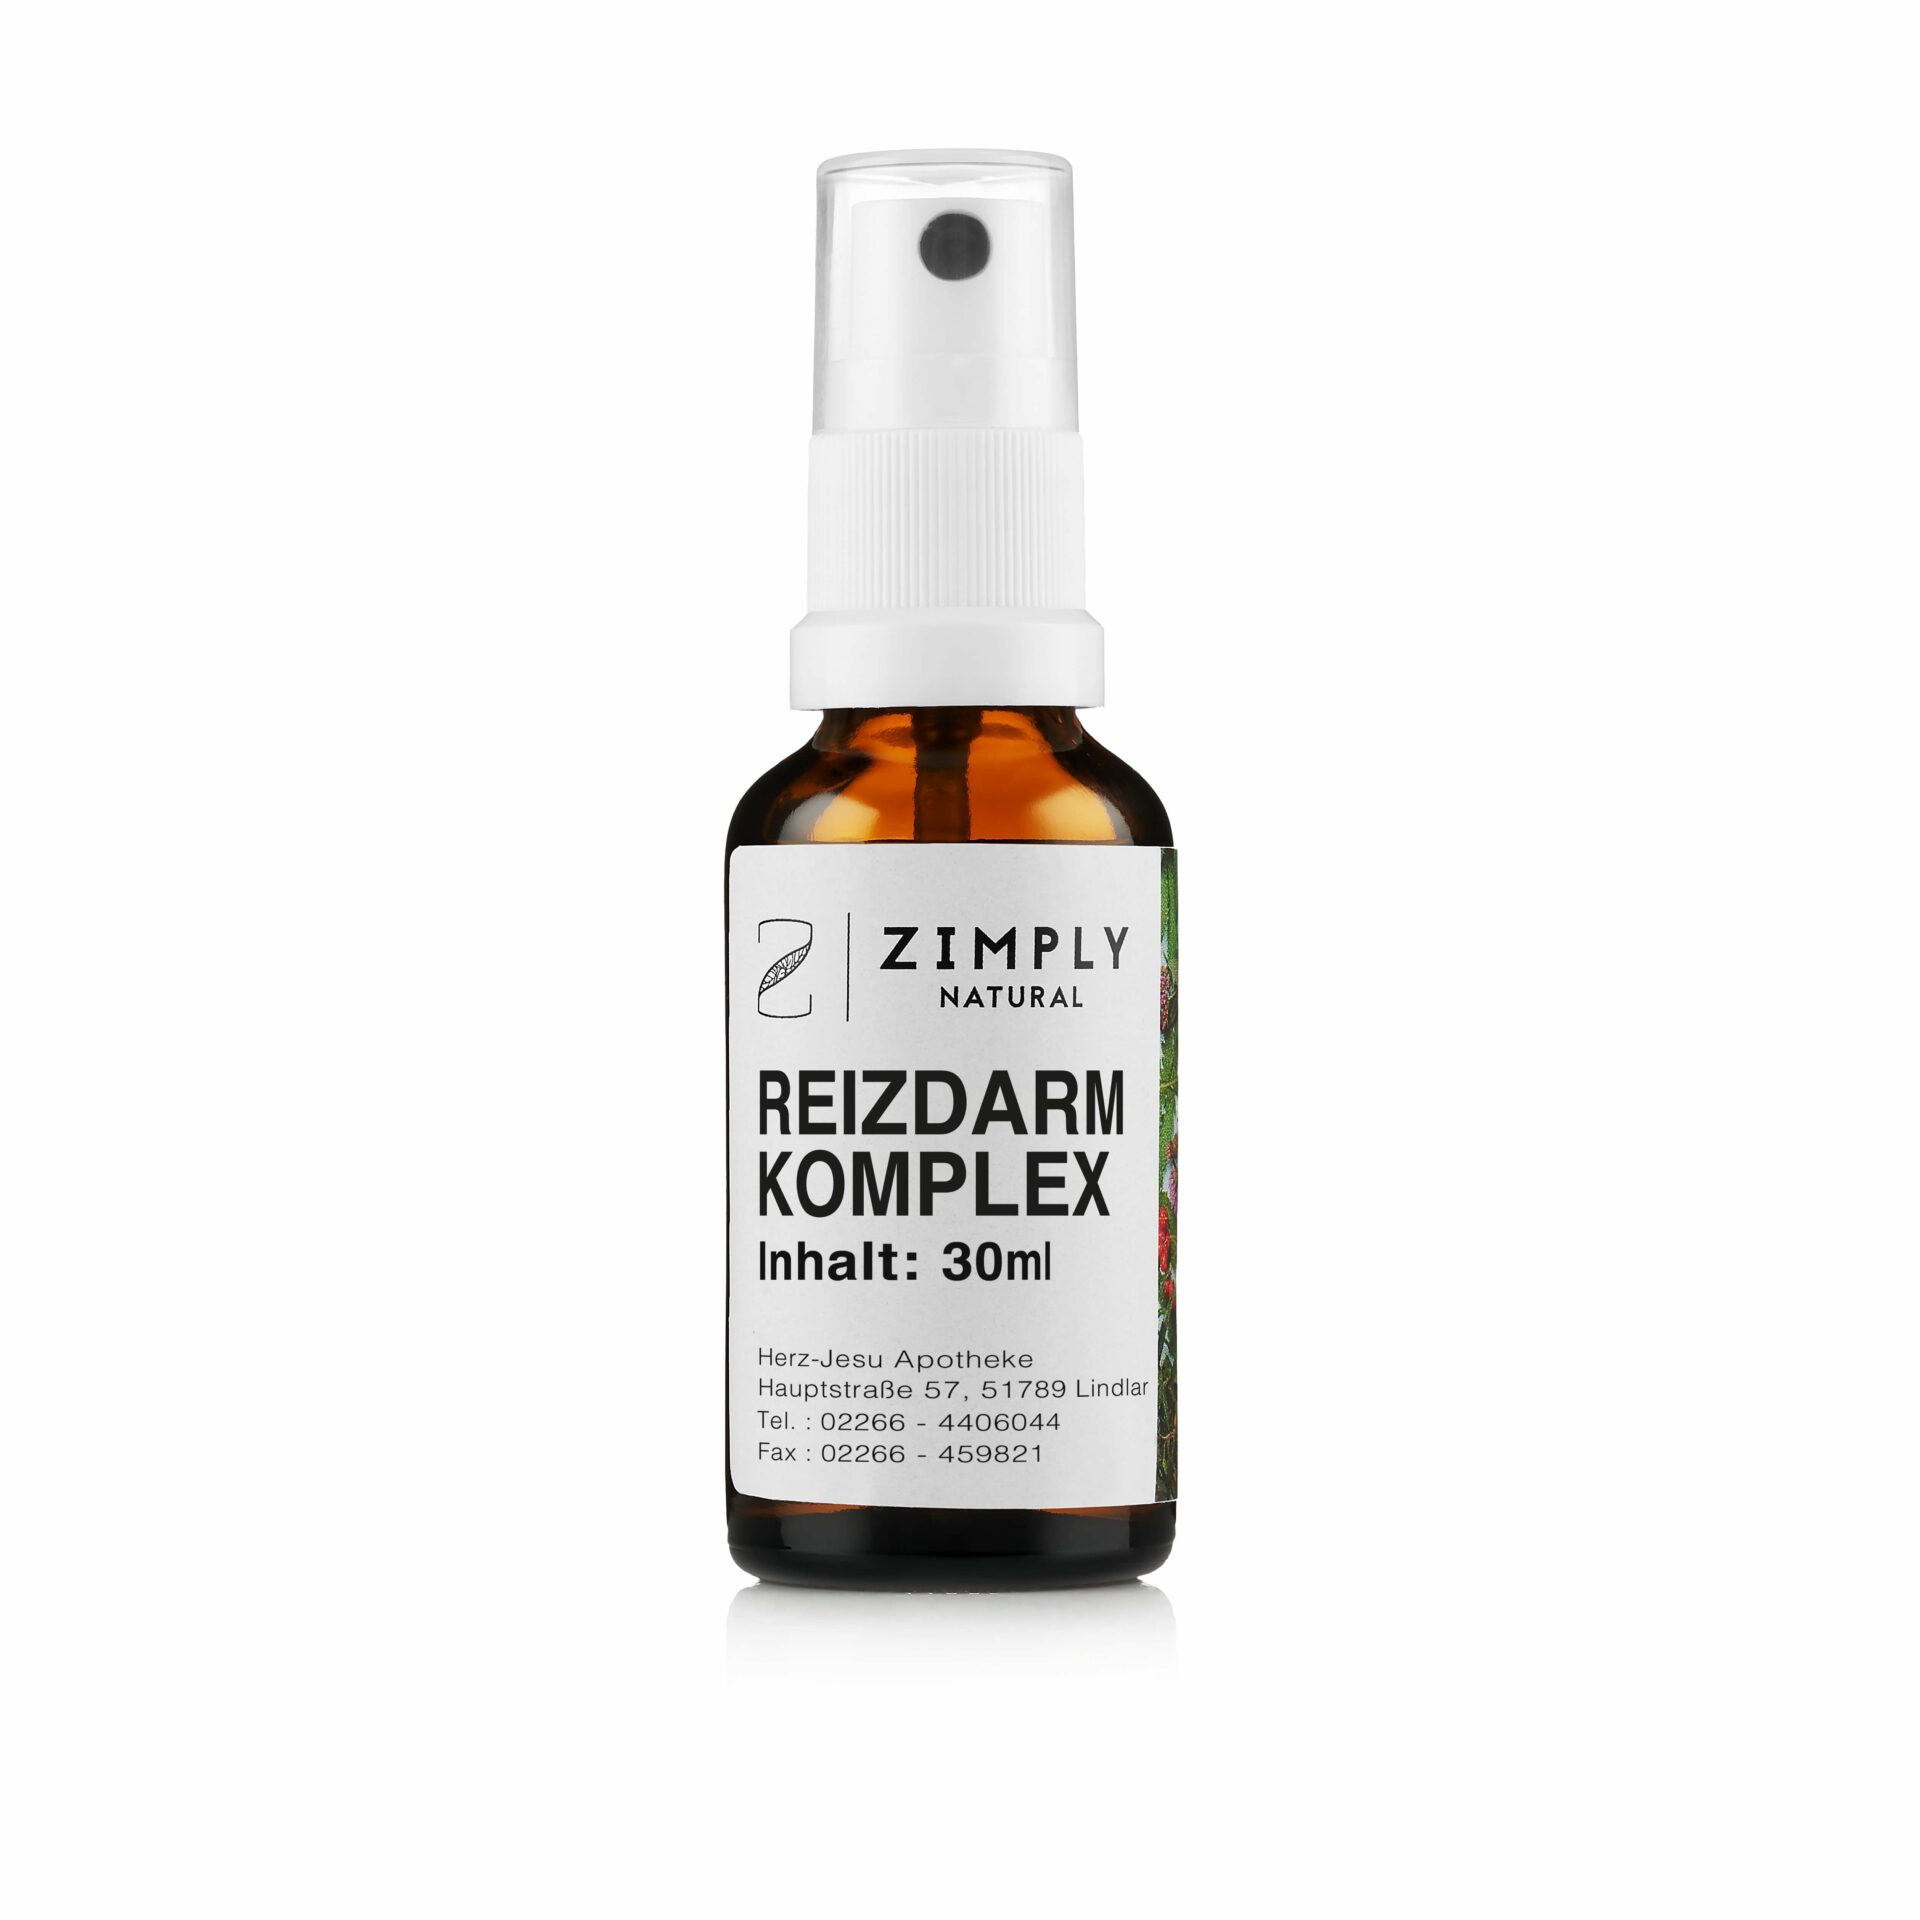 The Zimply Natural Irritable Bowel Complex mixture for spraying into the mouth.